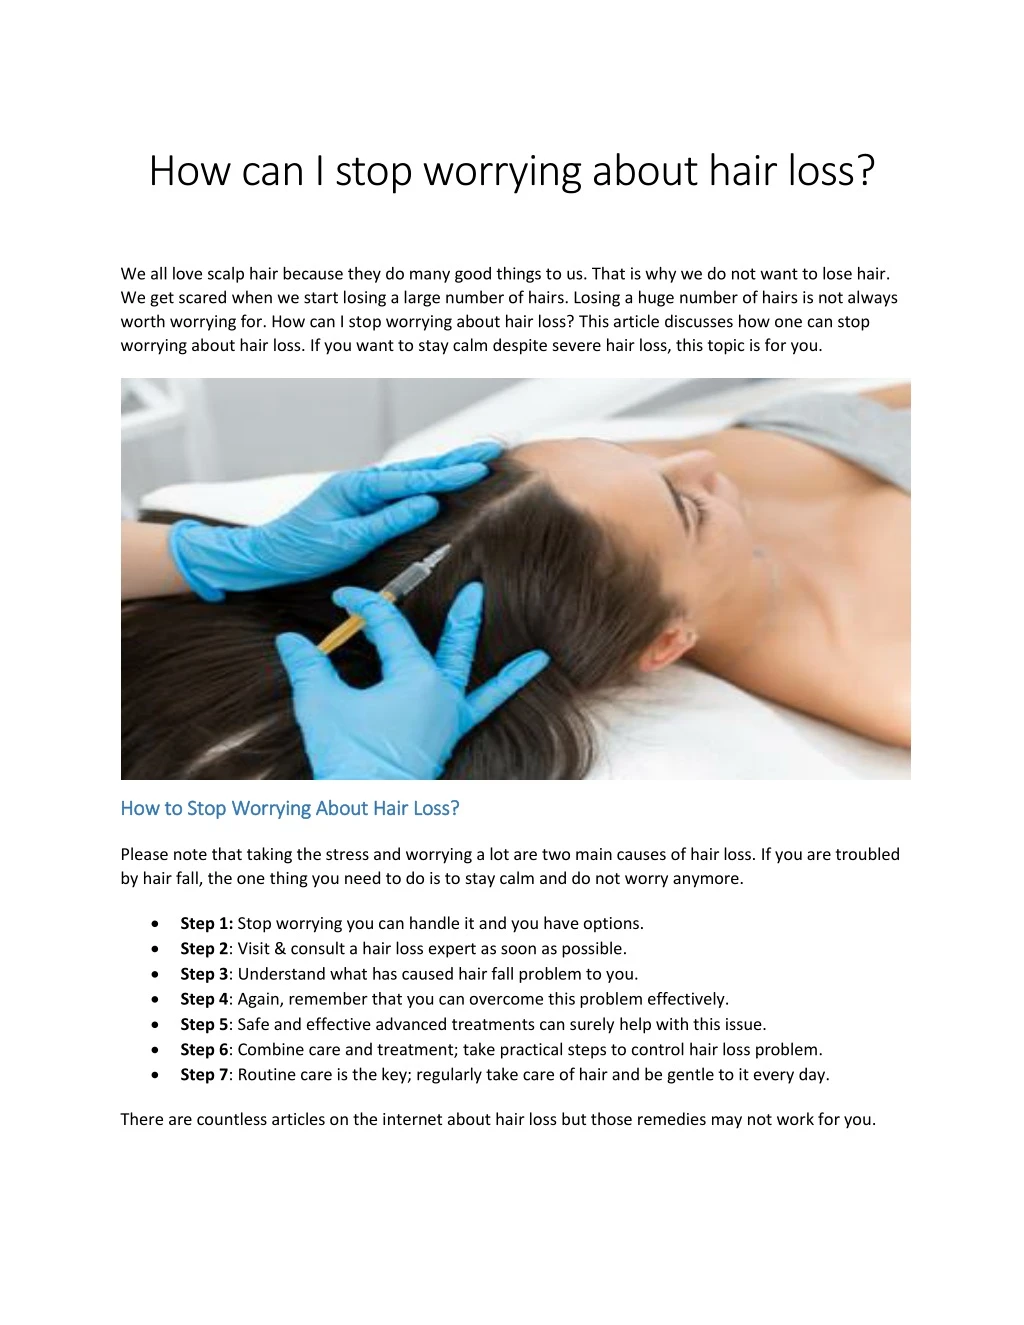 how can i stop worrying about hair loss